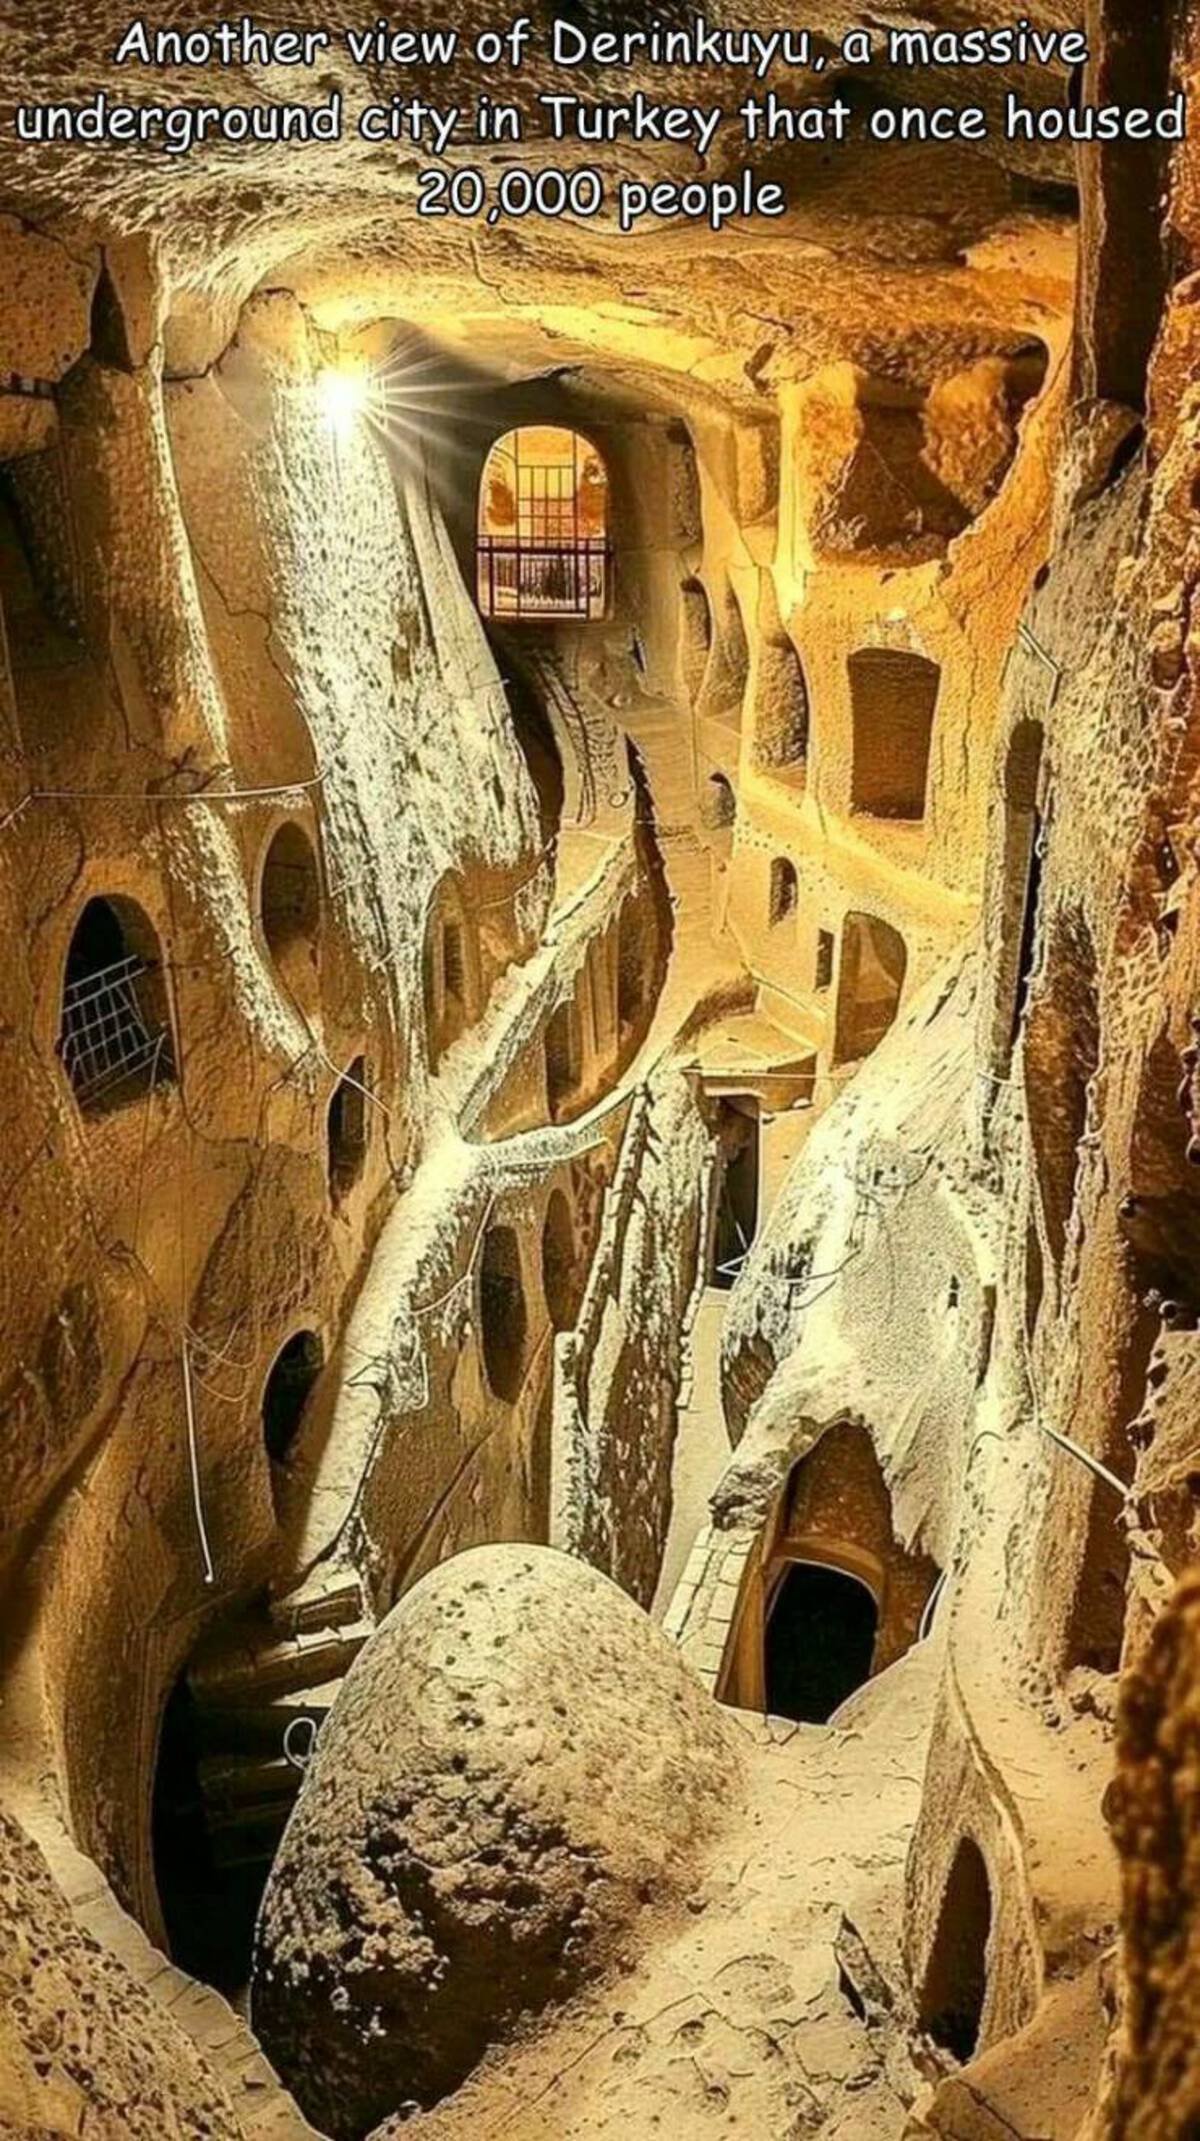 derinküyü - Another view of Derinkuyu, a massive underground city in Turkey that once housed 20,000 people